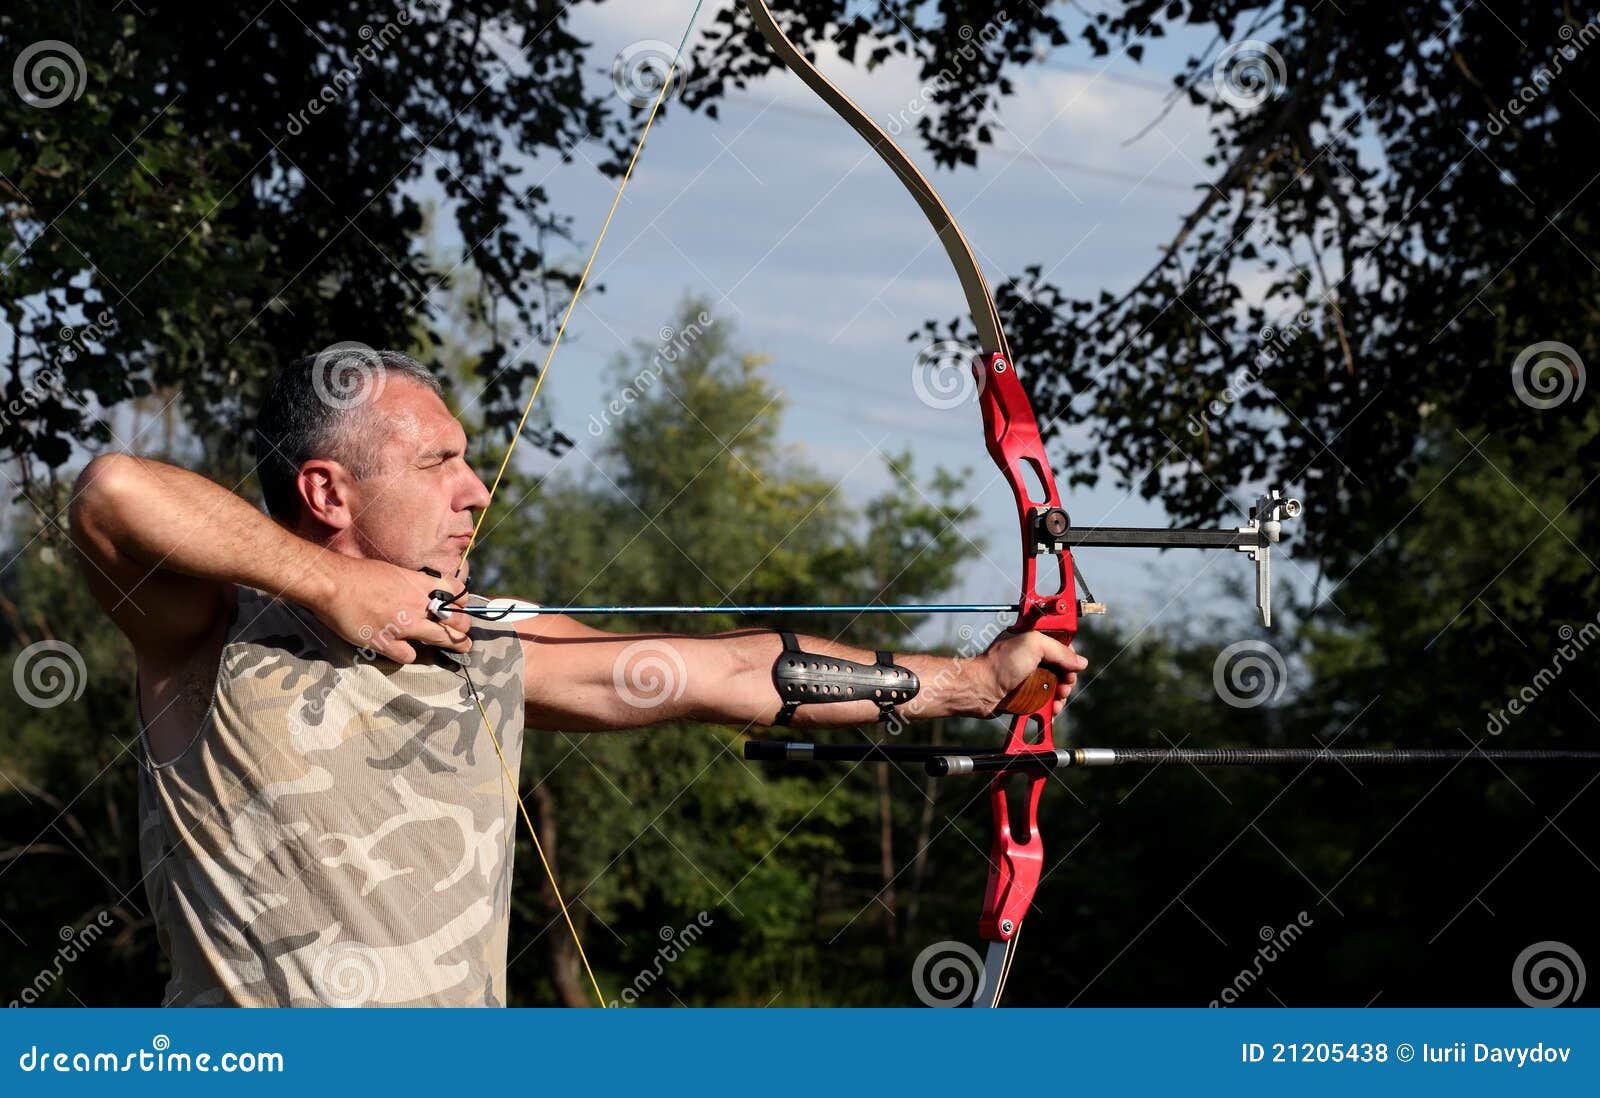 professional bowman aiming with bow and arrow